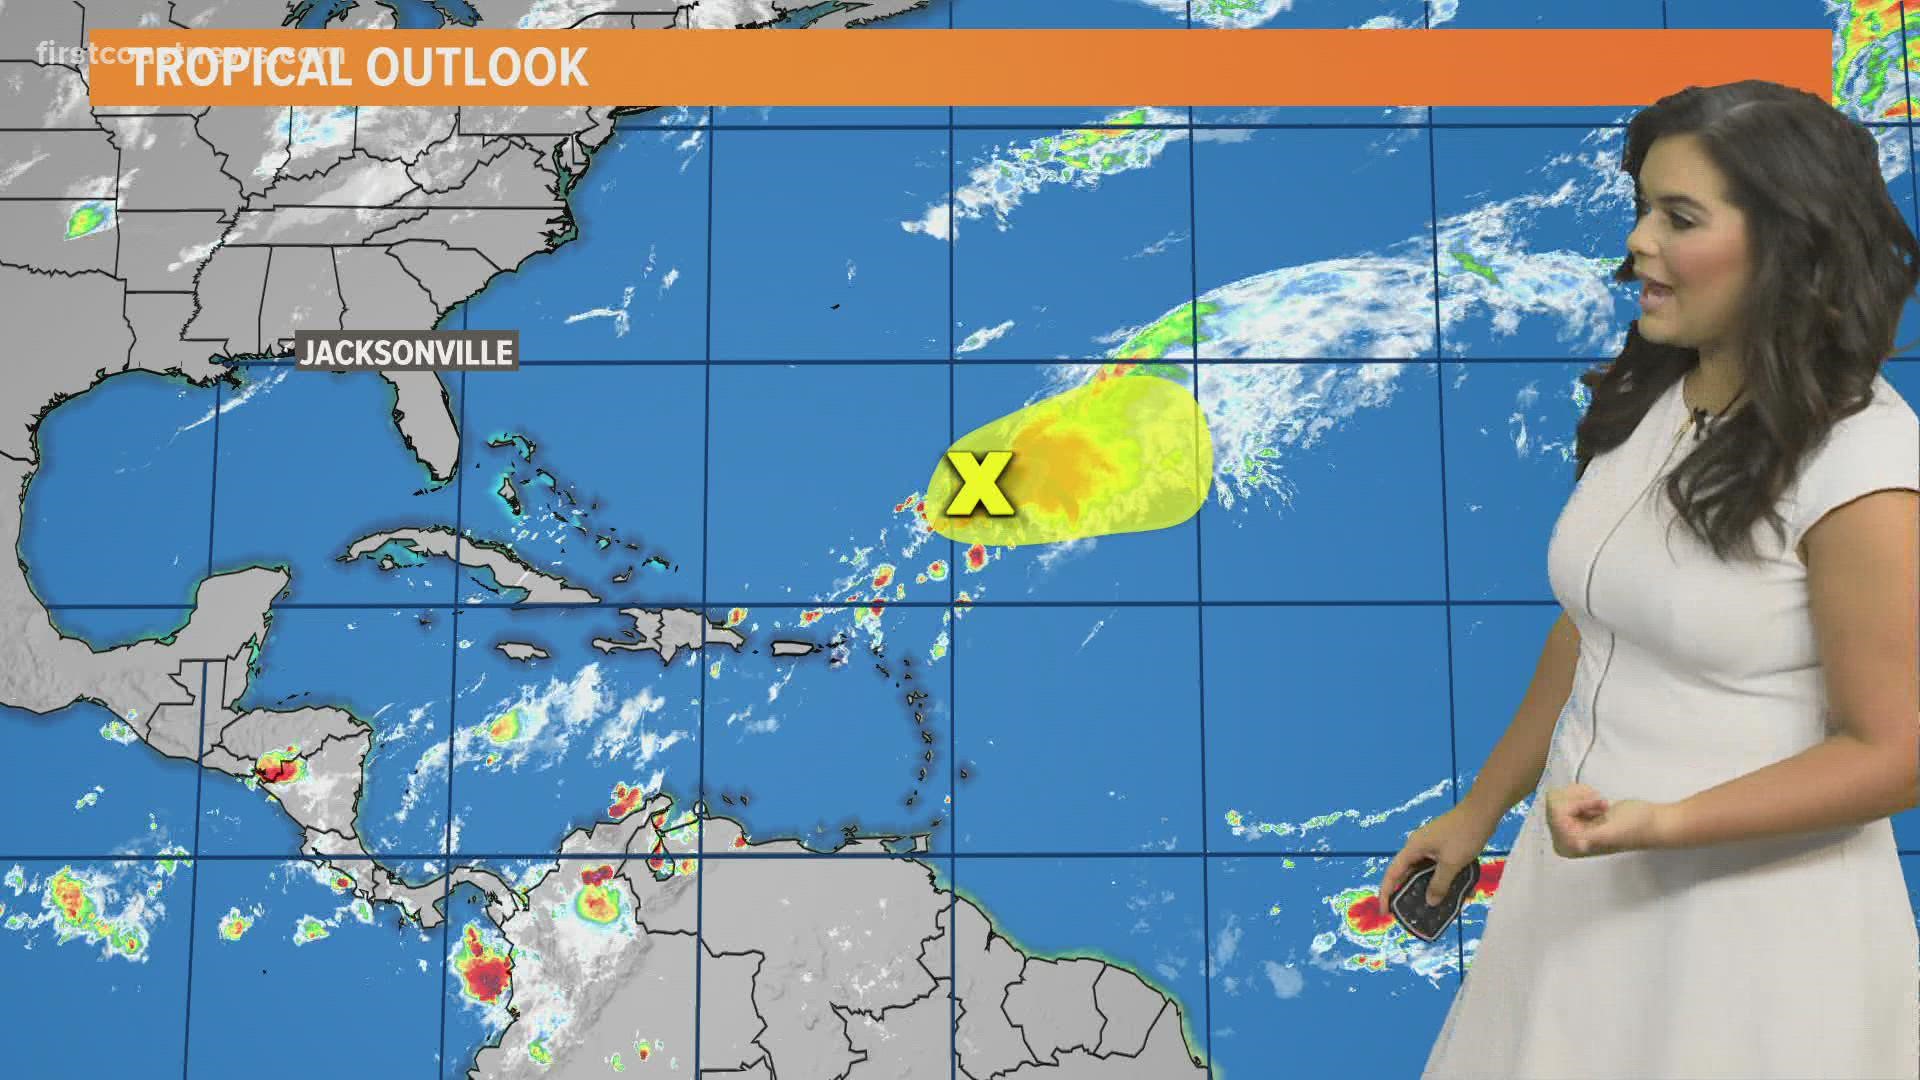 No tropical threats to the First Coast at this time